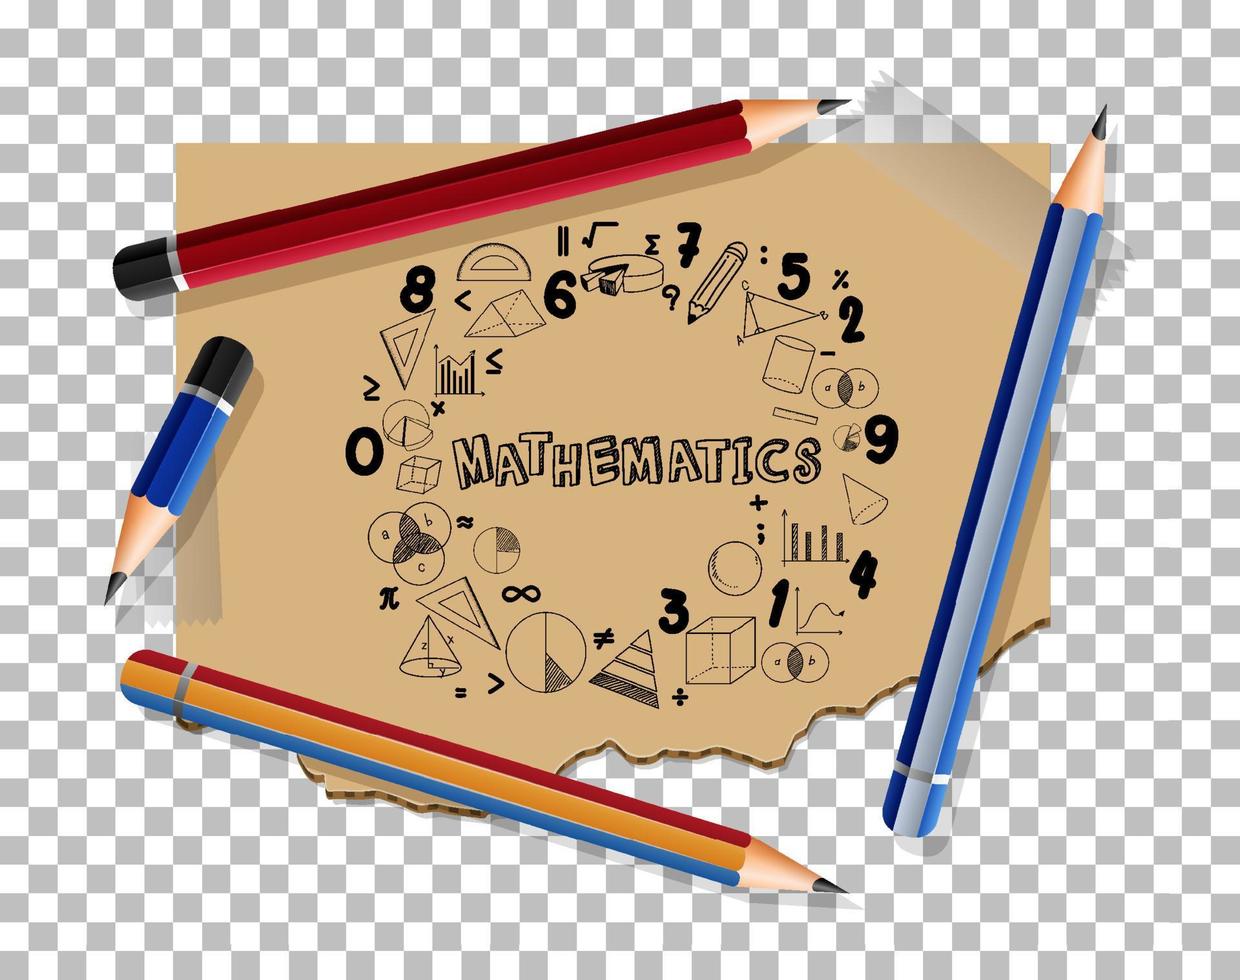 Doodle math formula with Mathematics font on notebook page vector